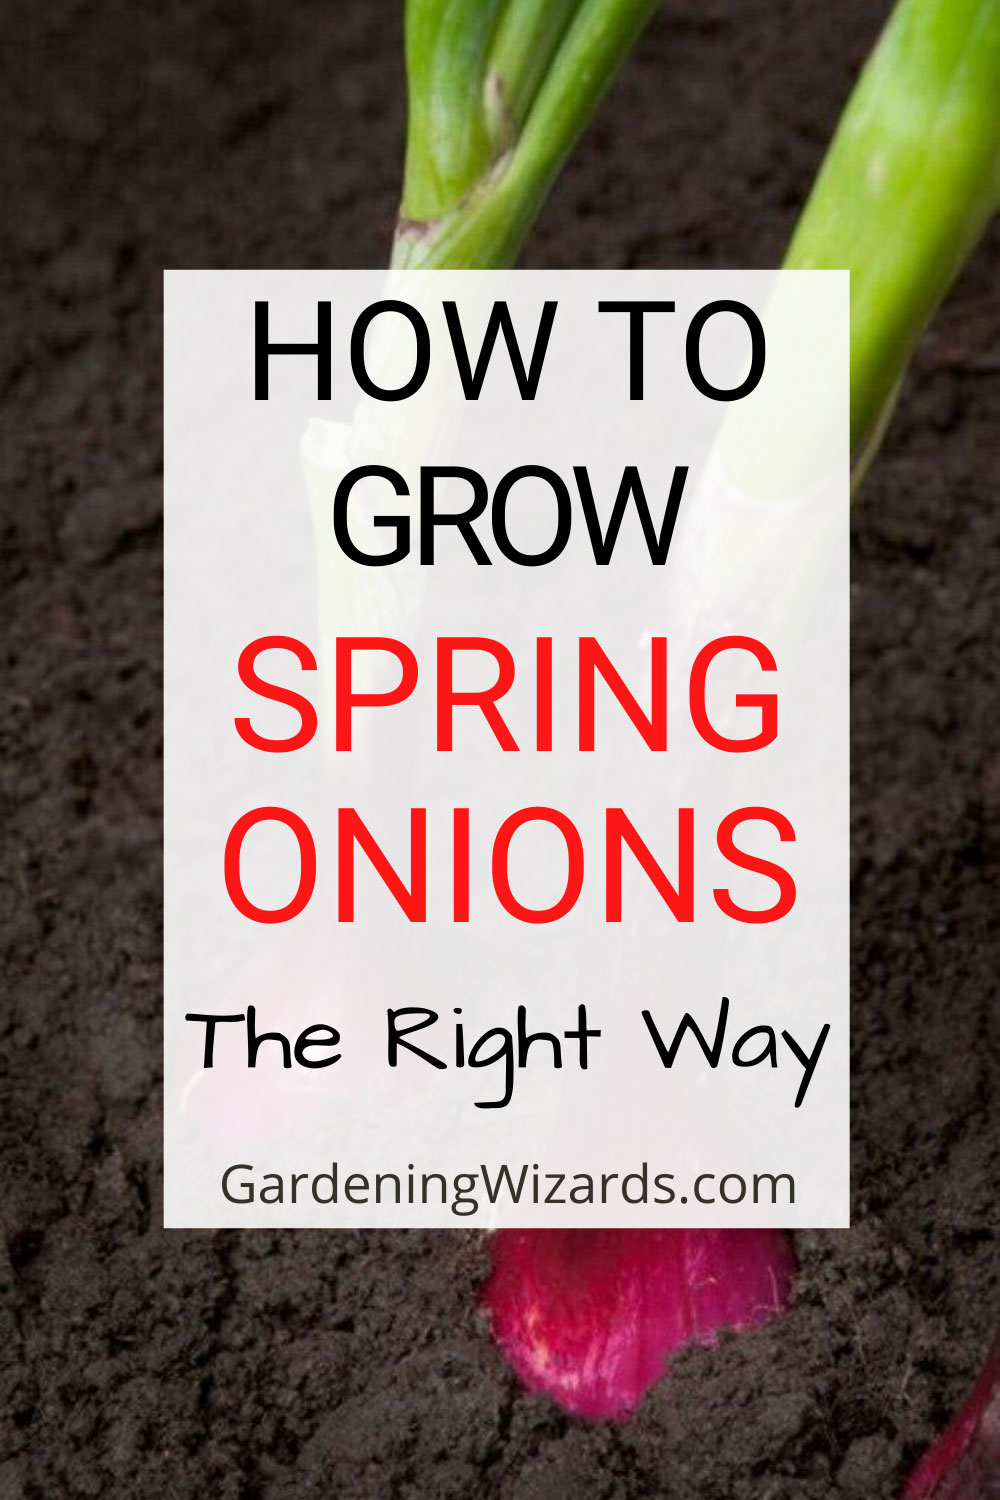 How To Grow Spring Onions